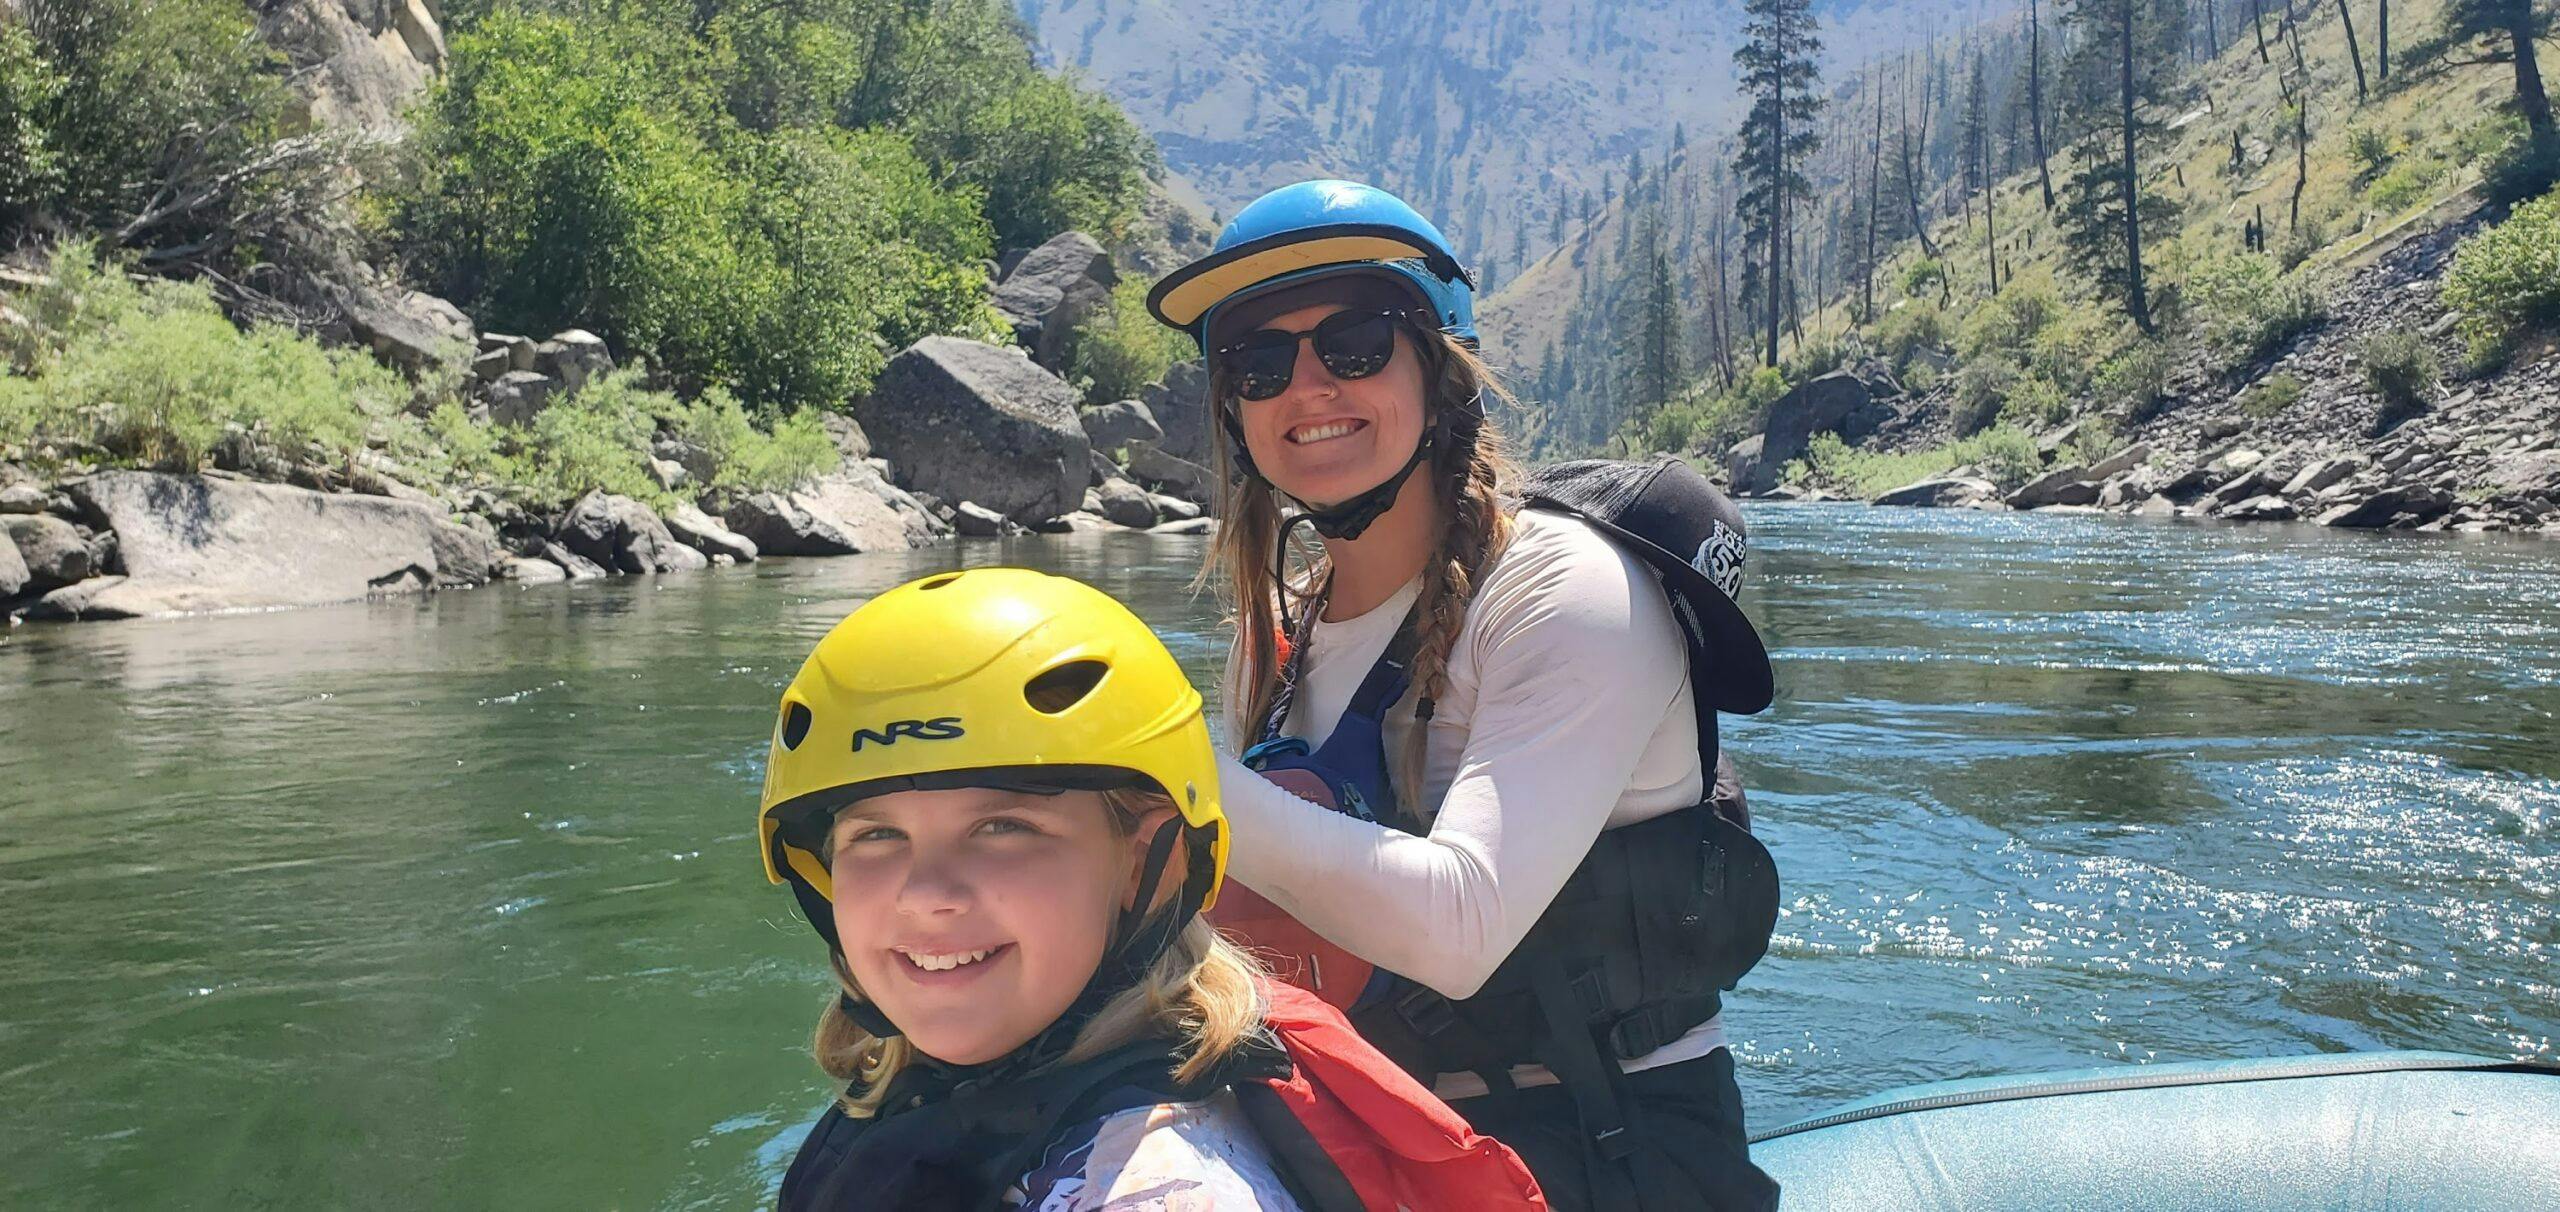 Guide and child rafting on the Middle Fork of the Salmon River in Idaho with MT Sobek